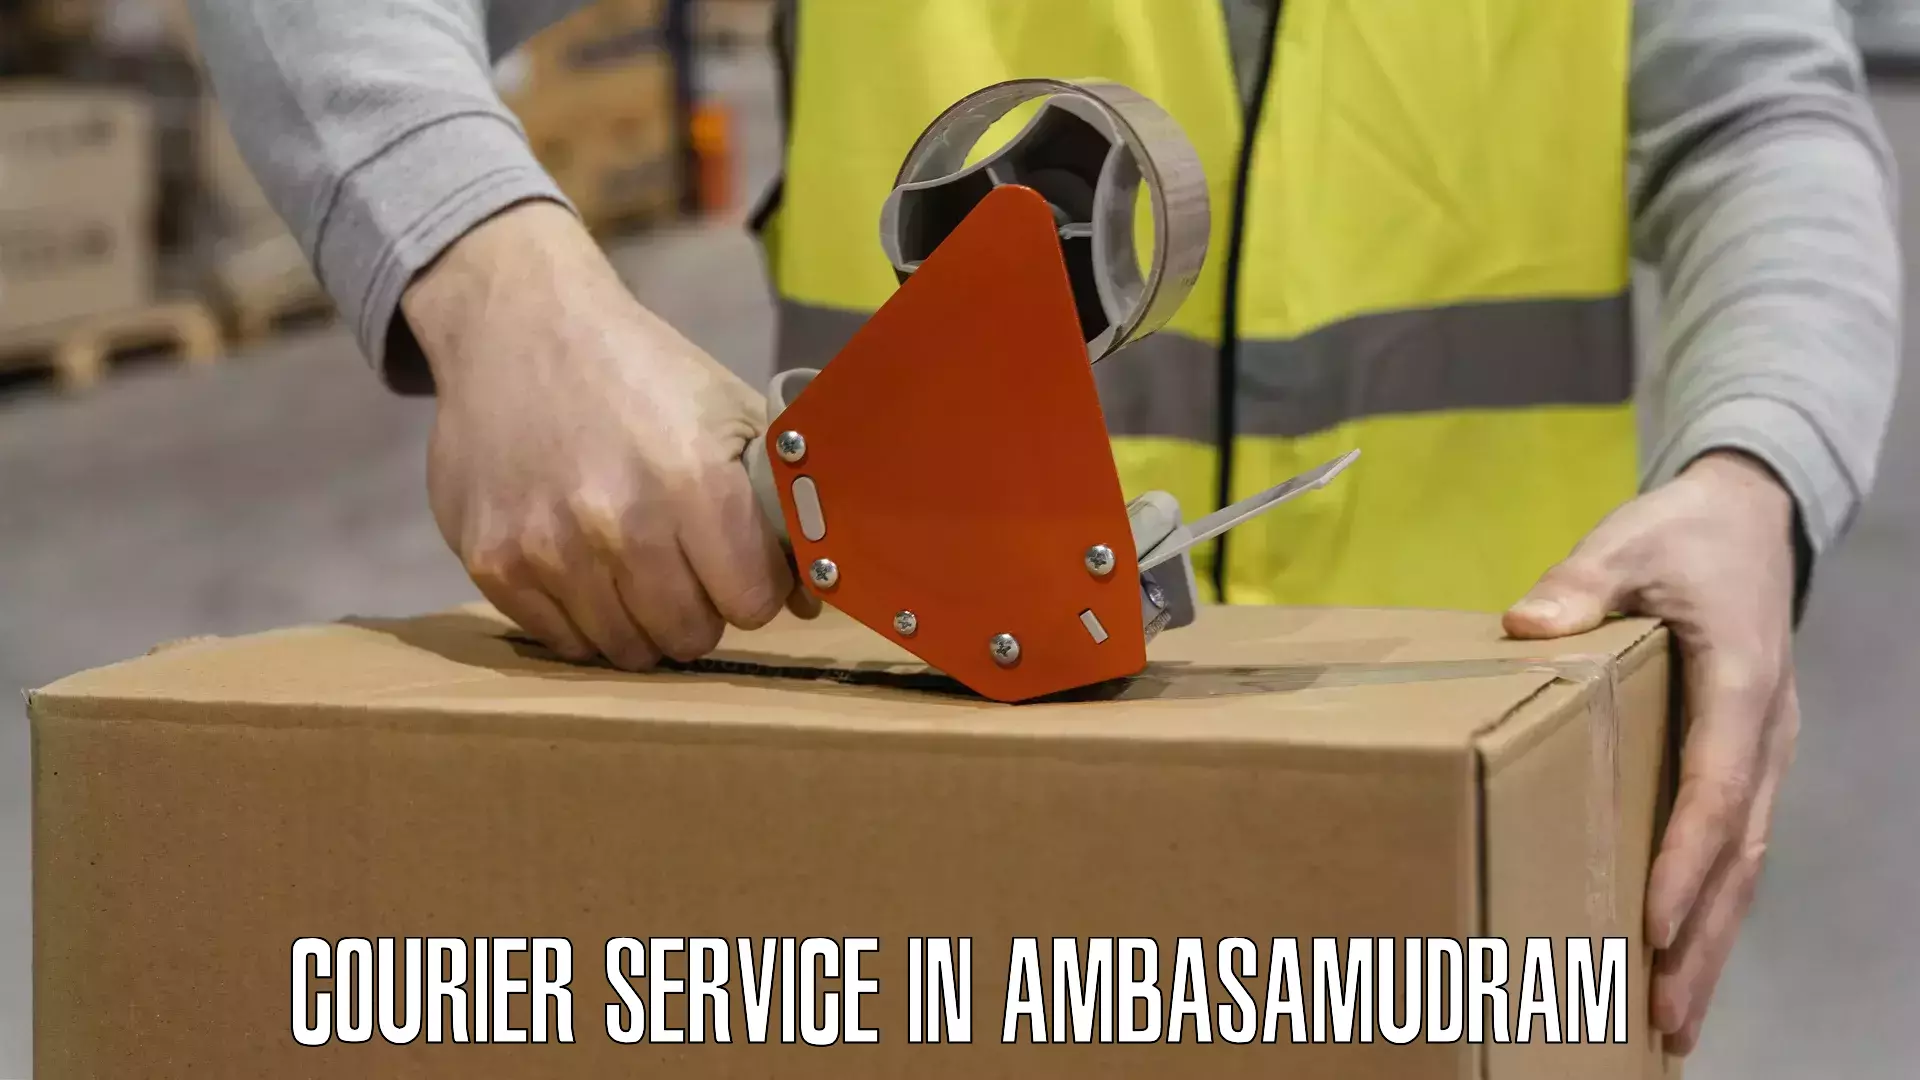 Quality courier services in Ambasamudram